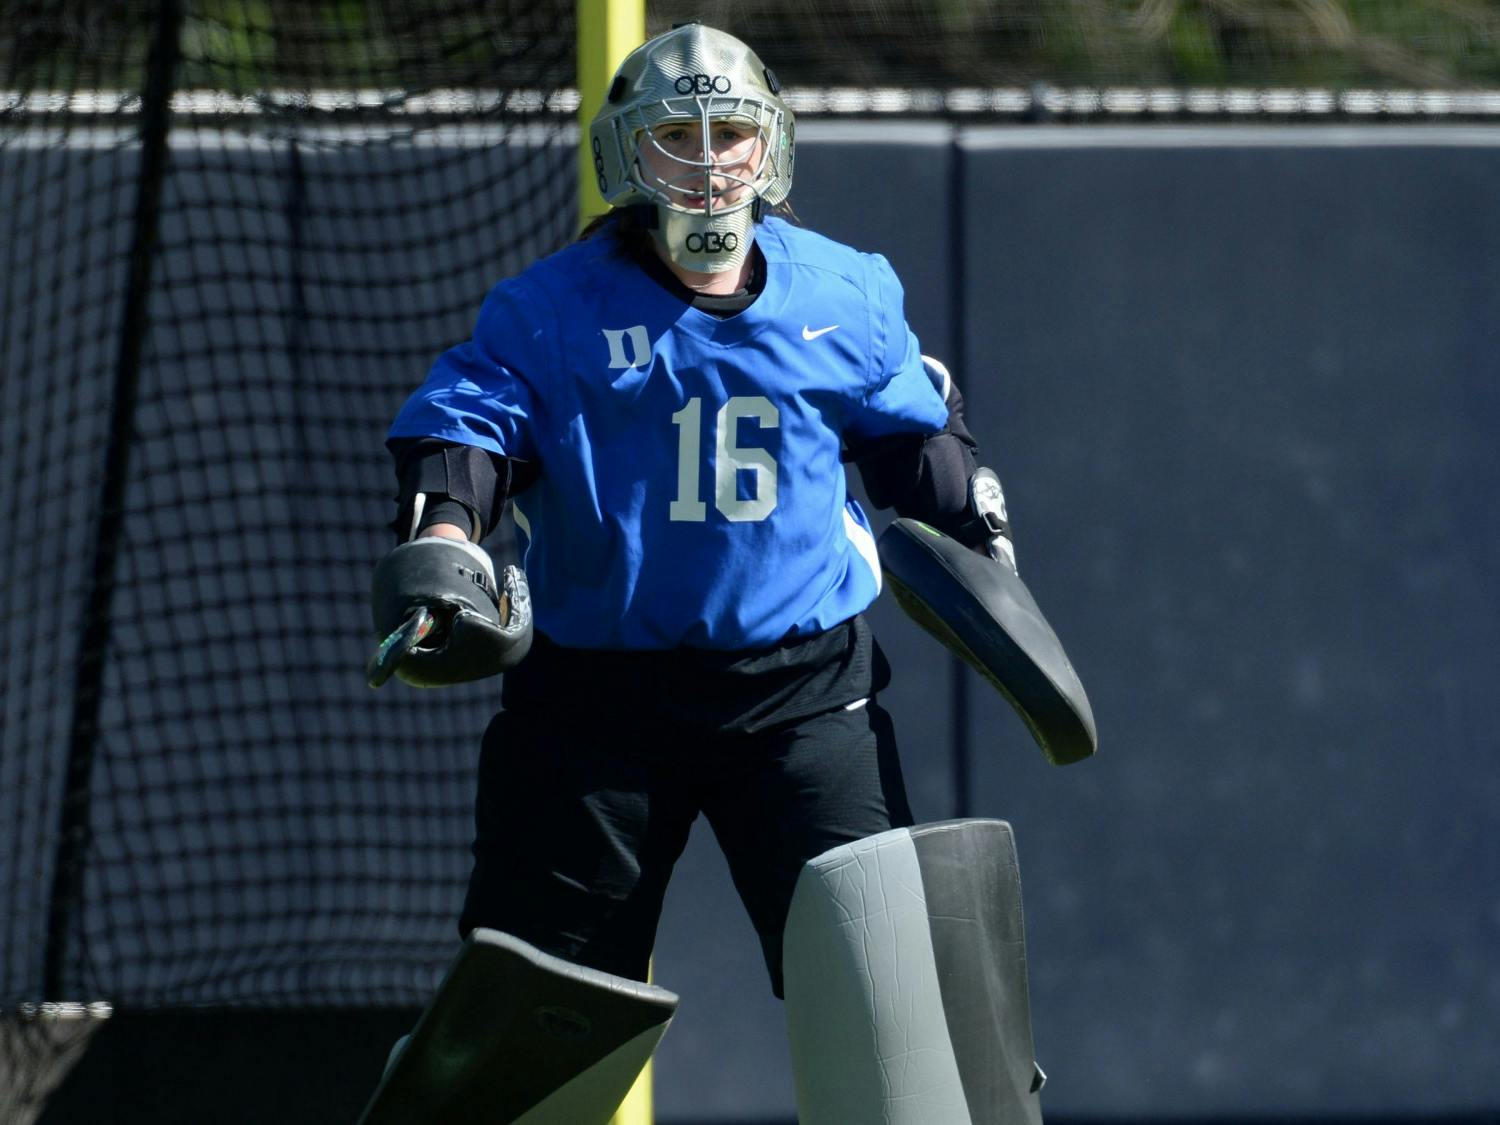 Freshman goalie Piper Hampsch notched a career-high 19 saves in the defeat, more than double her previous career-high.